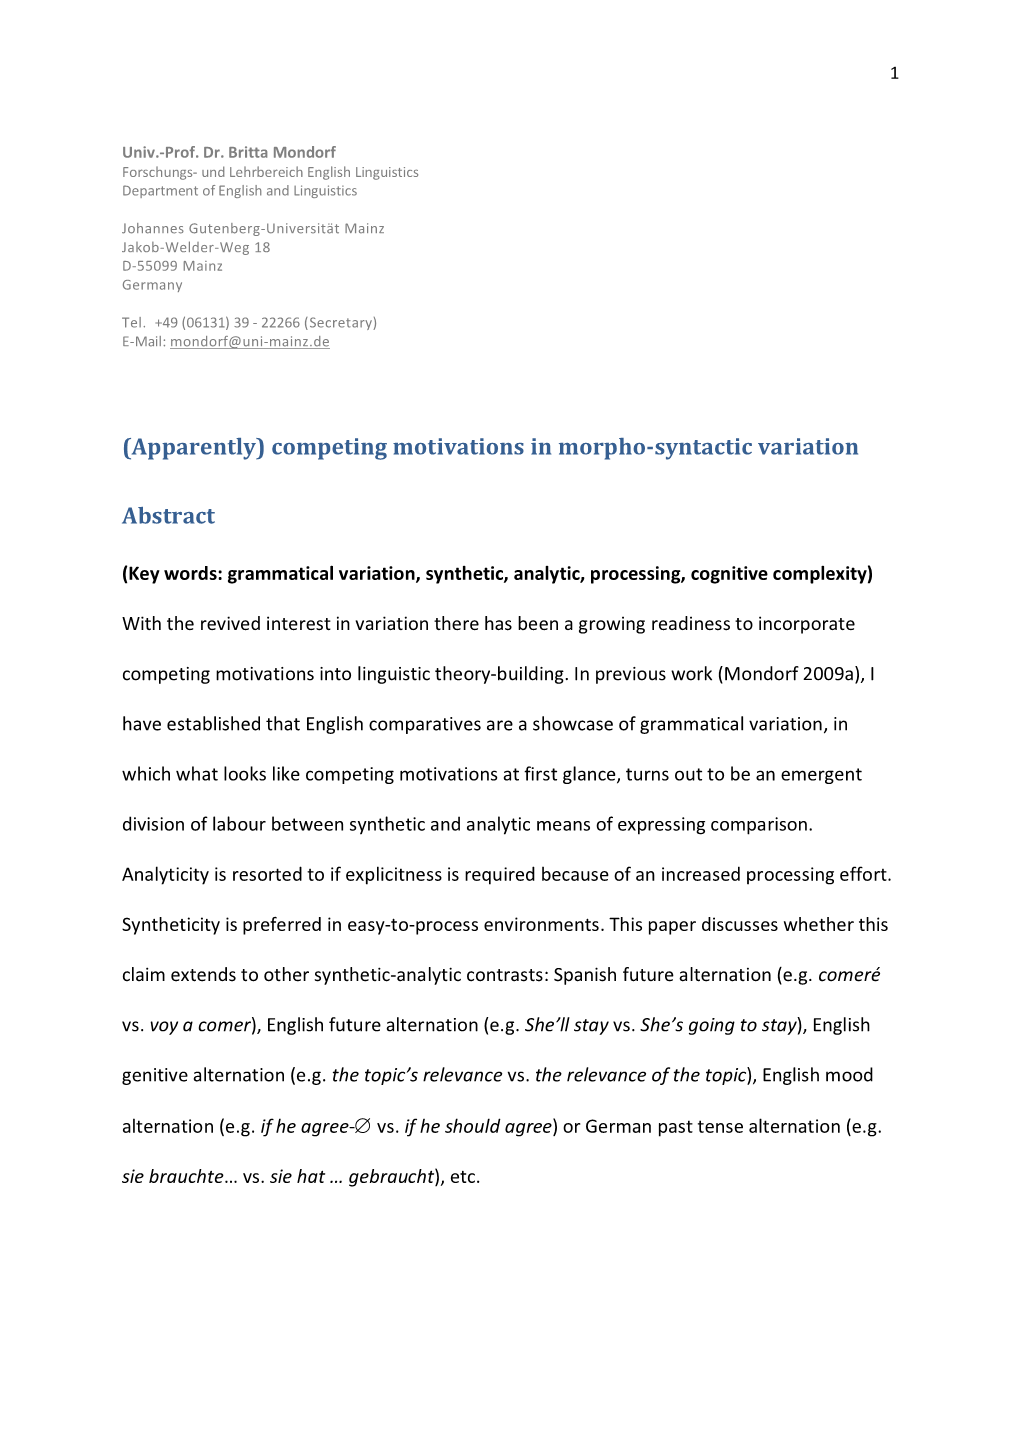 (Apparently) Competing Motivations in Morpho-Syntactic Variation Abstract